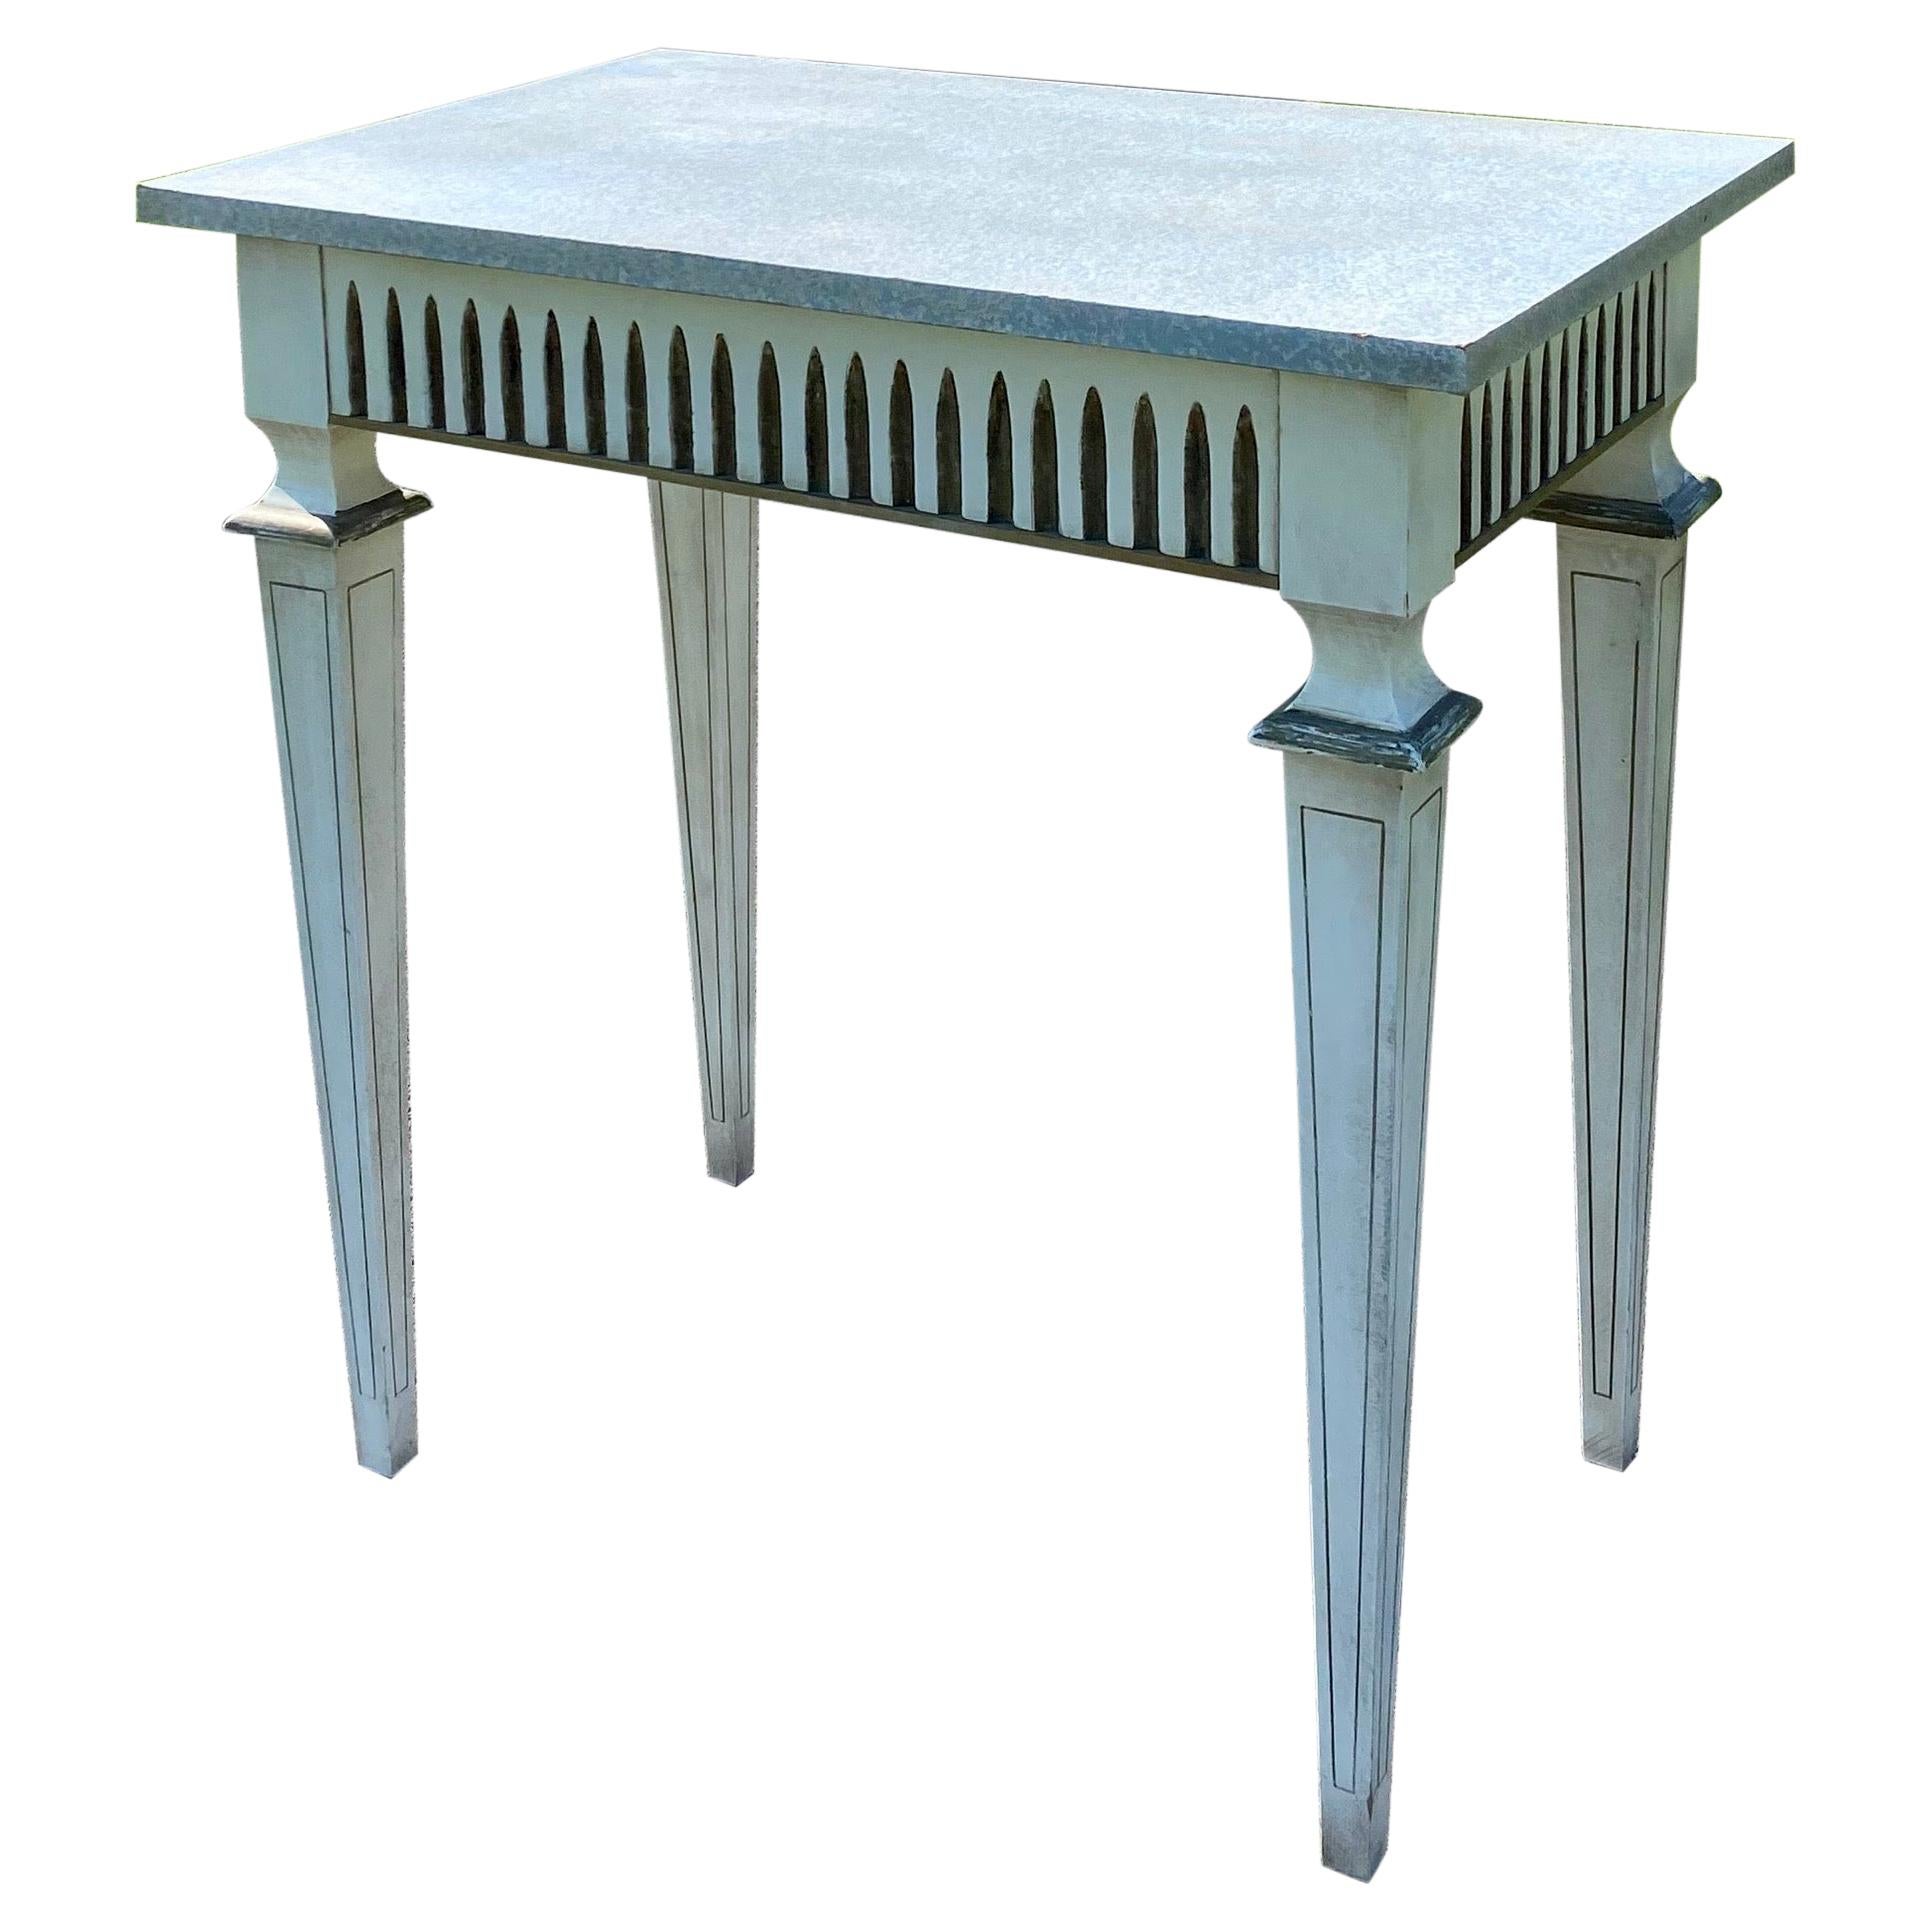 Louis XVI Neoclassical Style Painted Console or Center Table